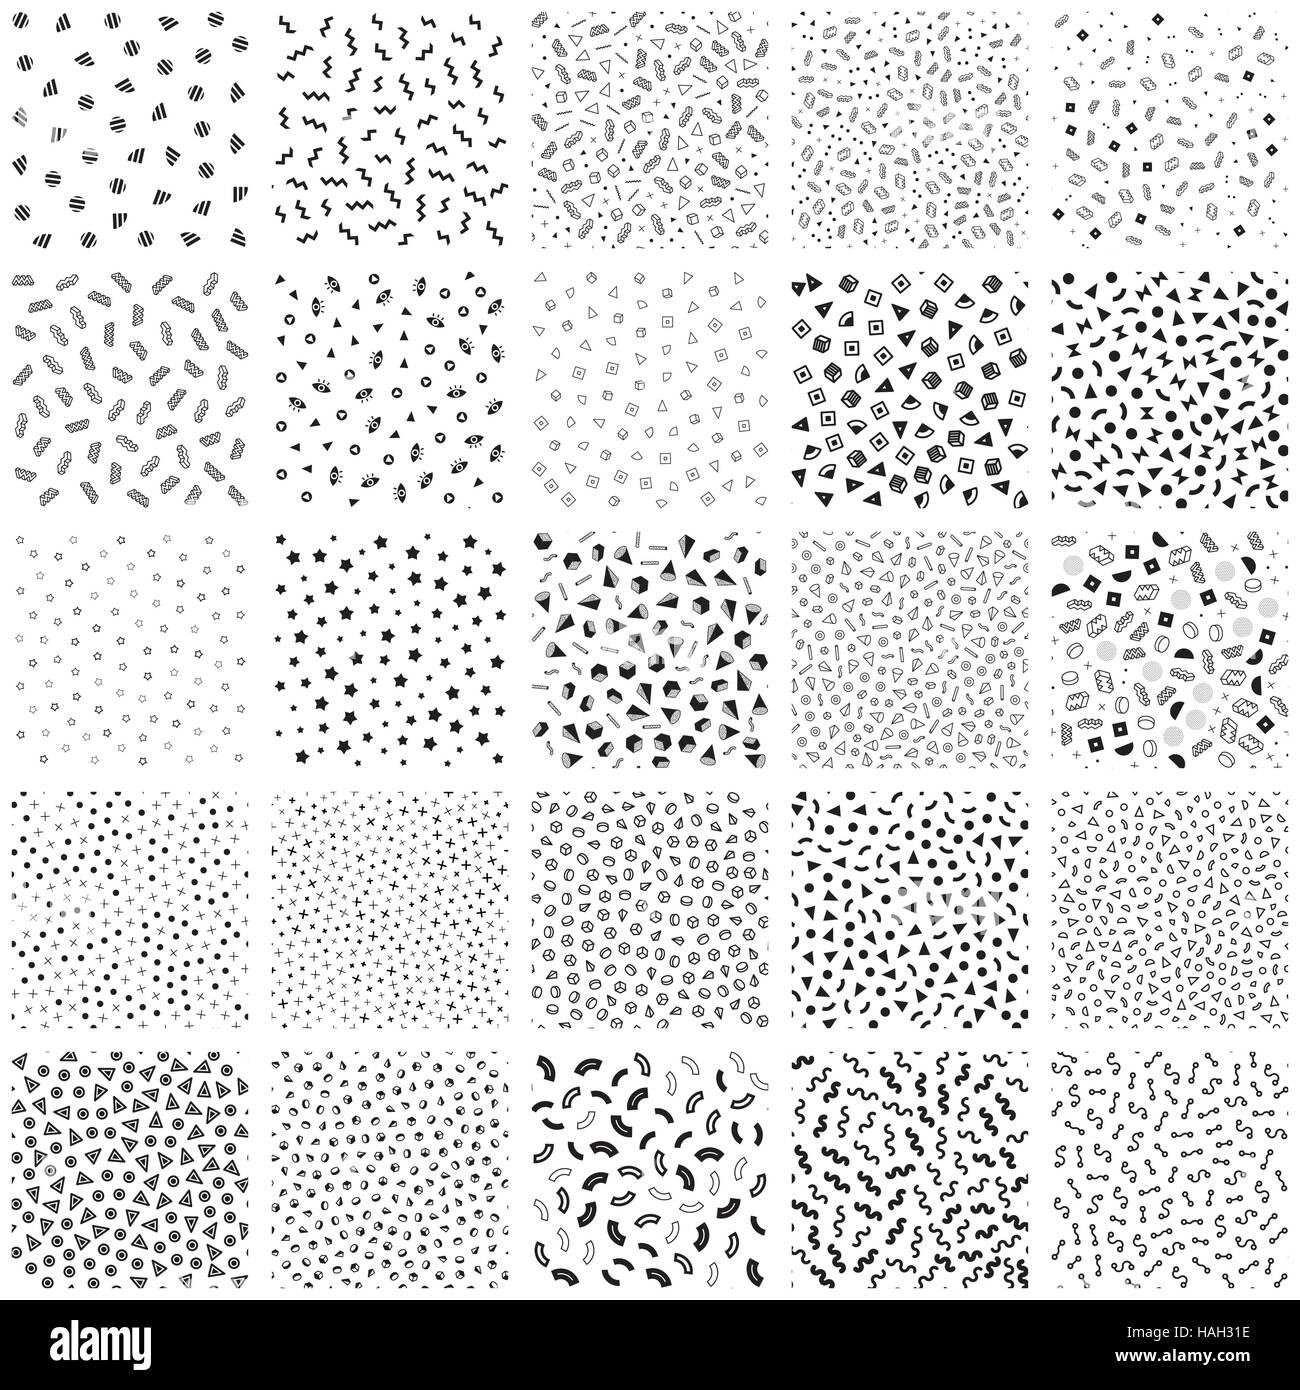 Big ollection of swatches memphis patterns seamless. Fashion 80-90s. Black and white fashion textures Stock Vector